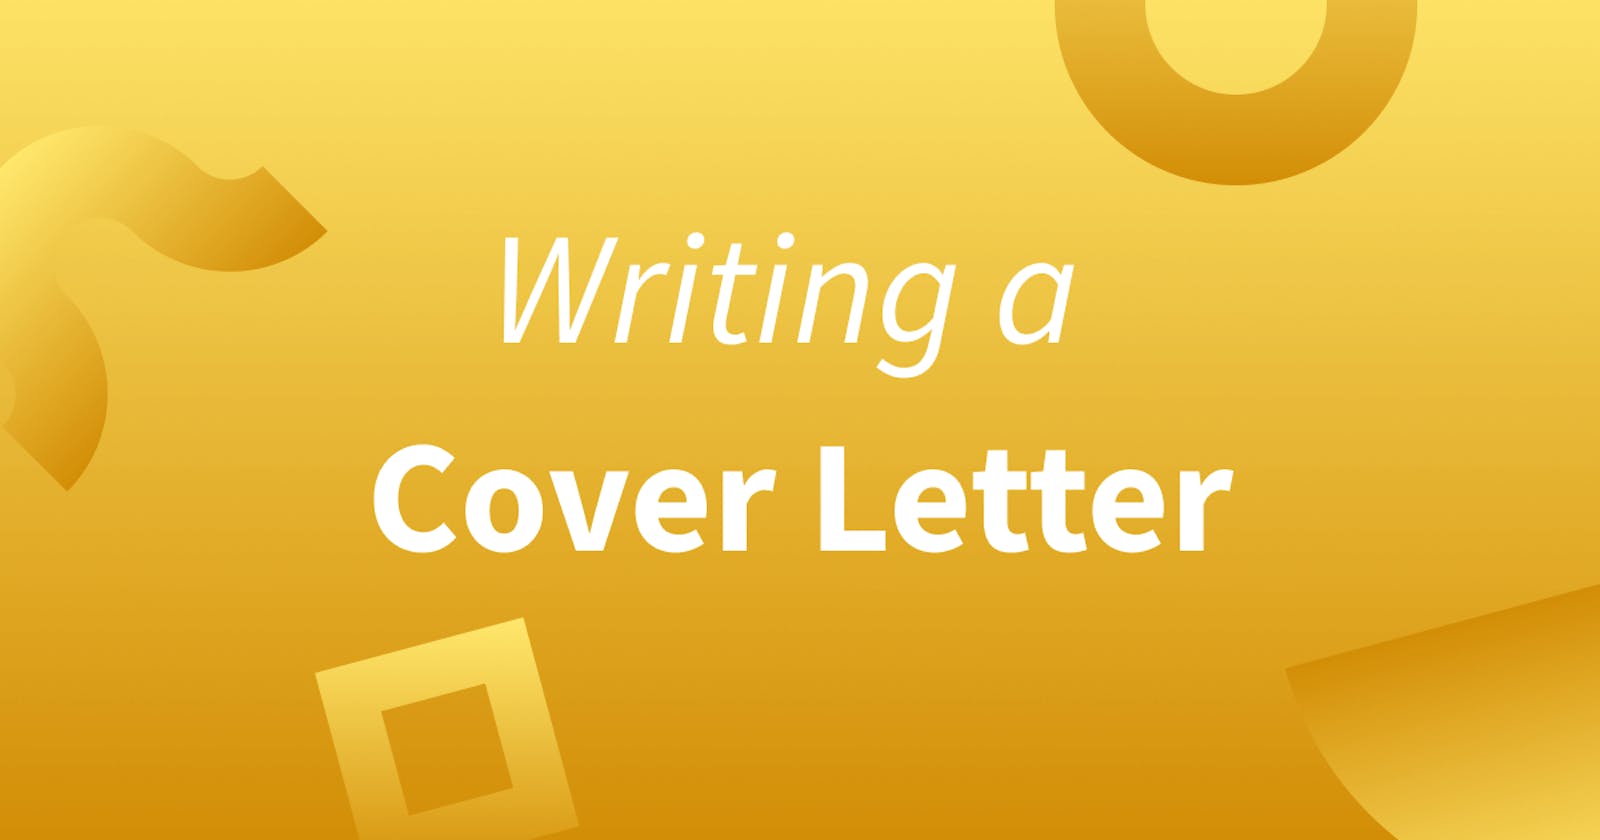 Cover Letter Structure and Contents